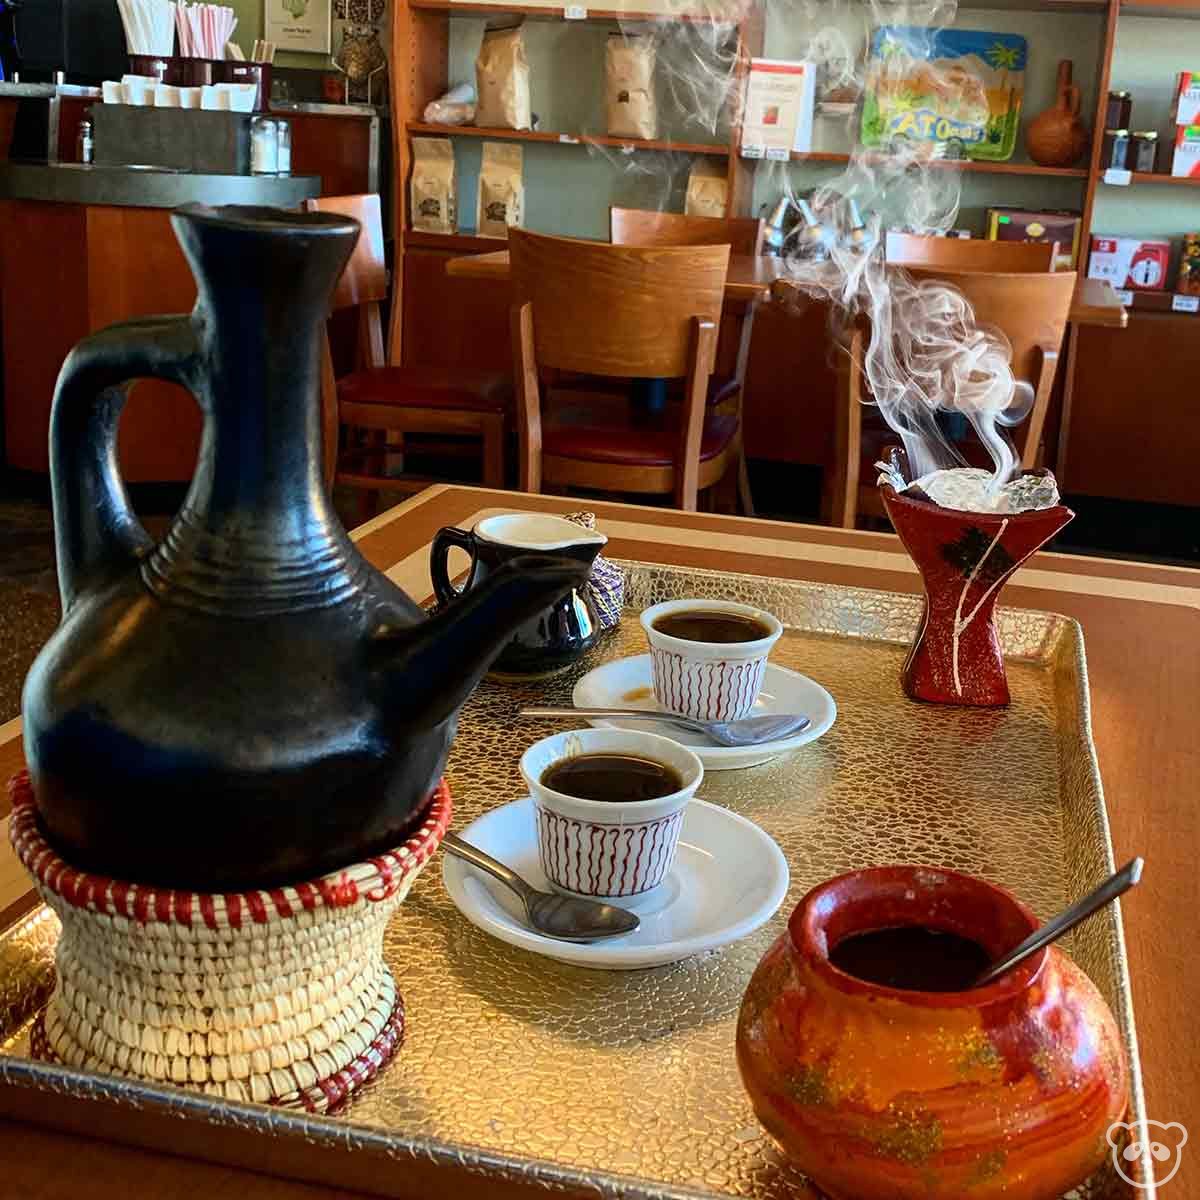 Ethiopian coffee service including coffee pot, coffee cups, sugar bowl, and incense. 